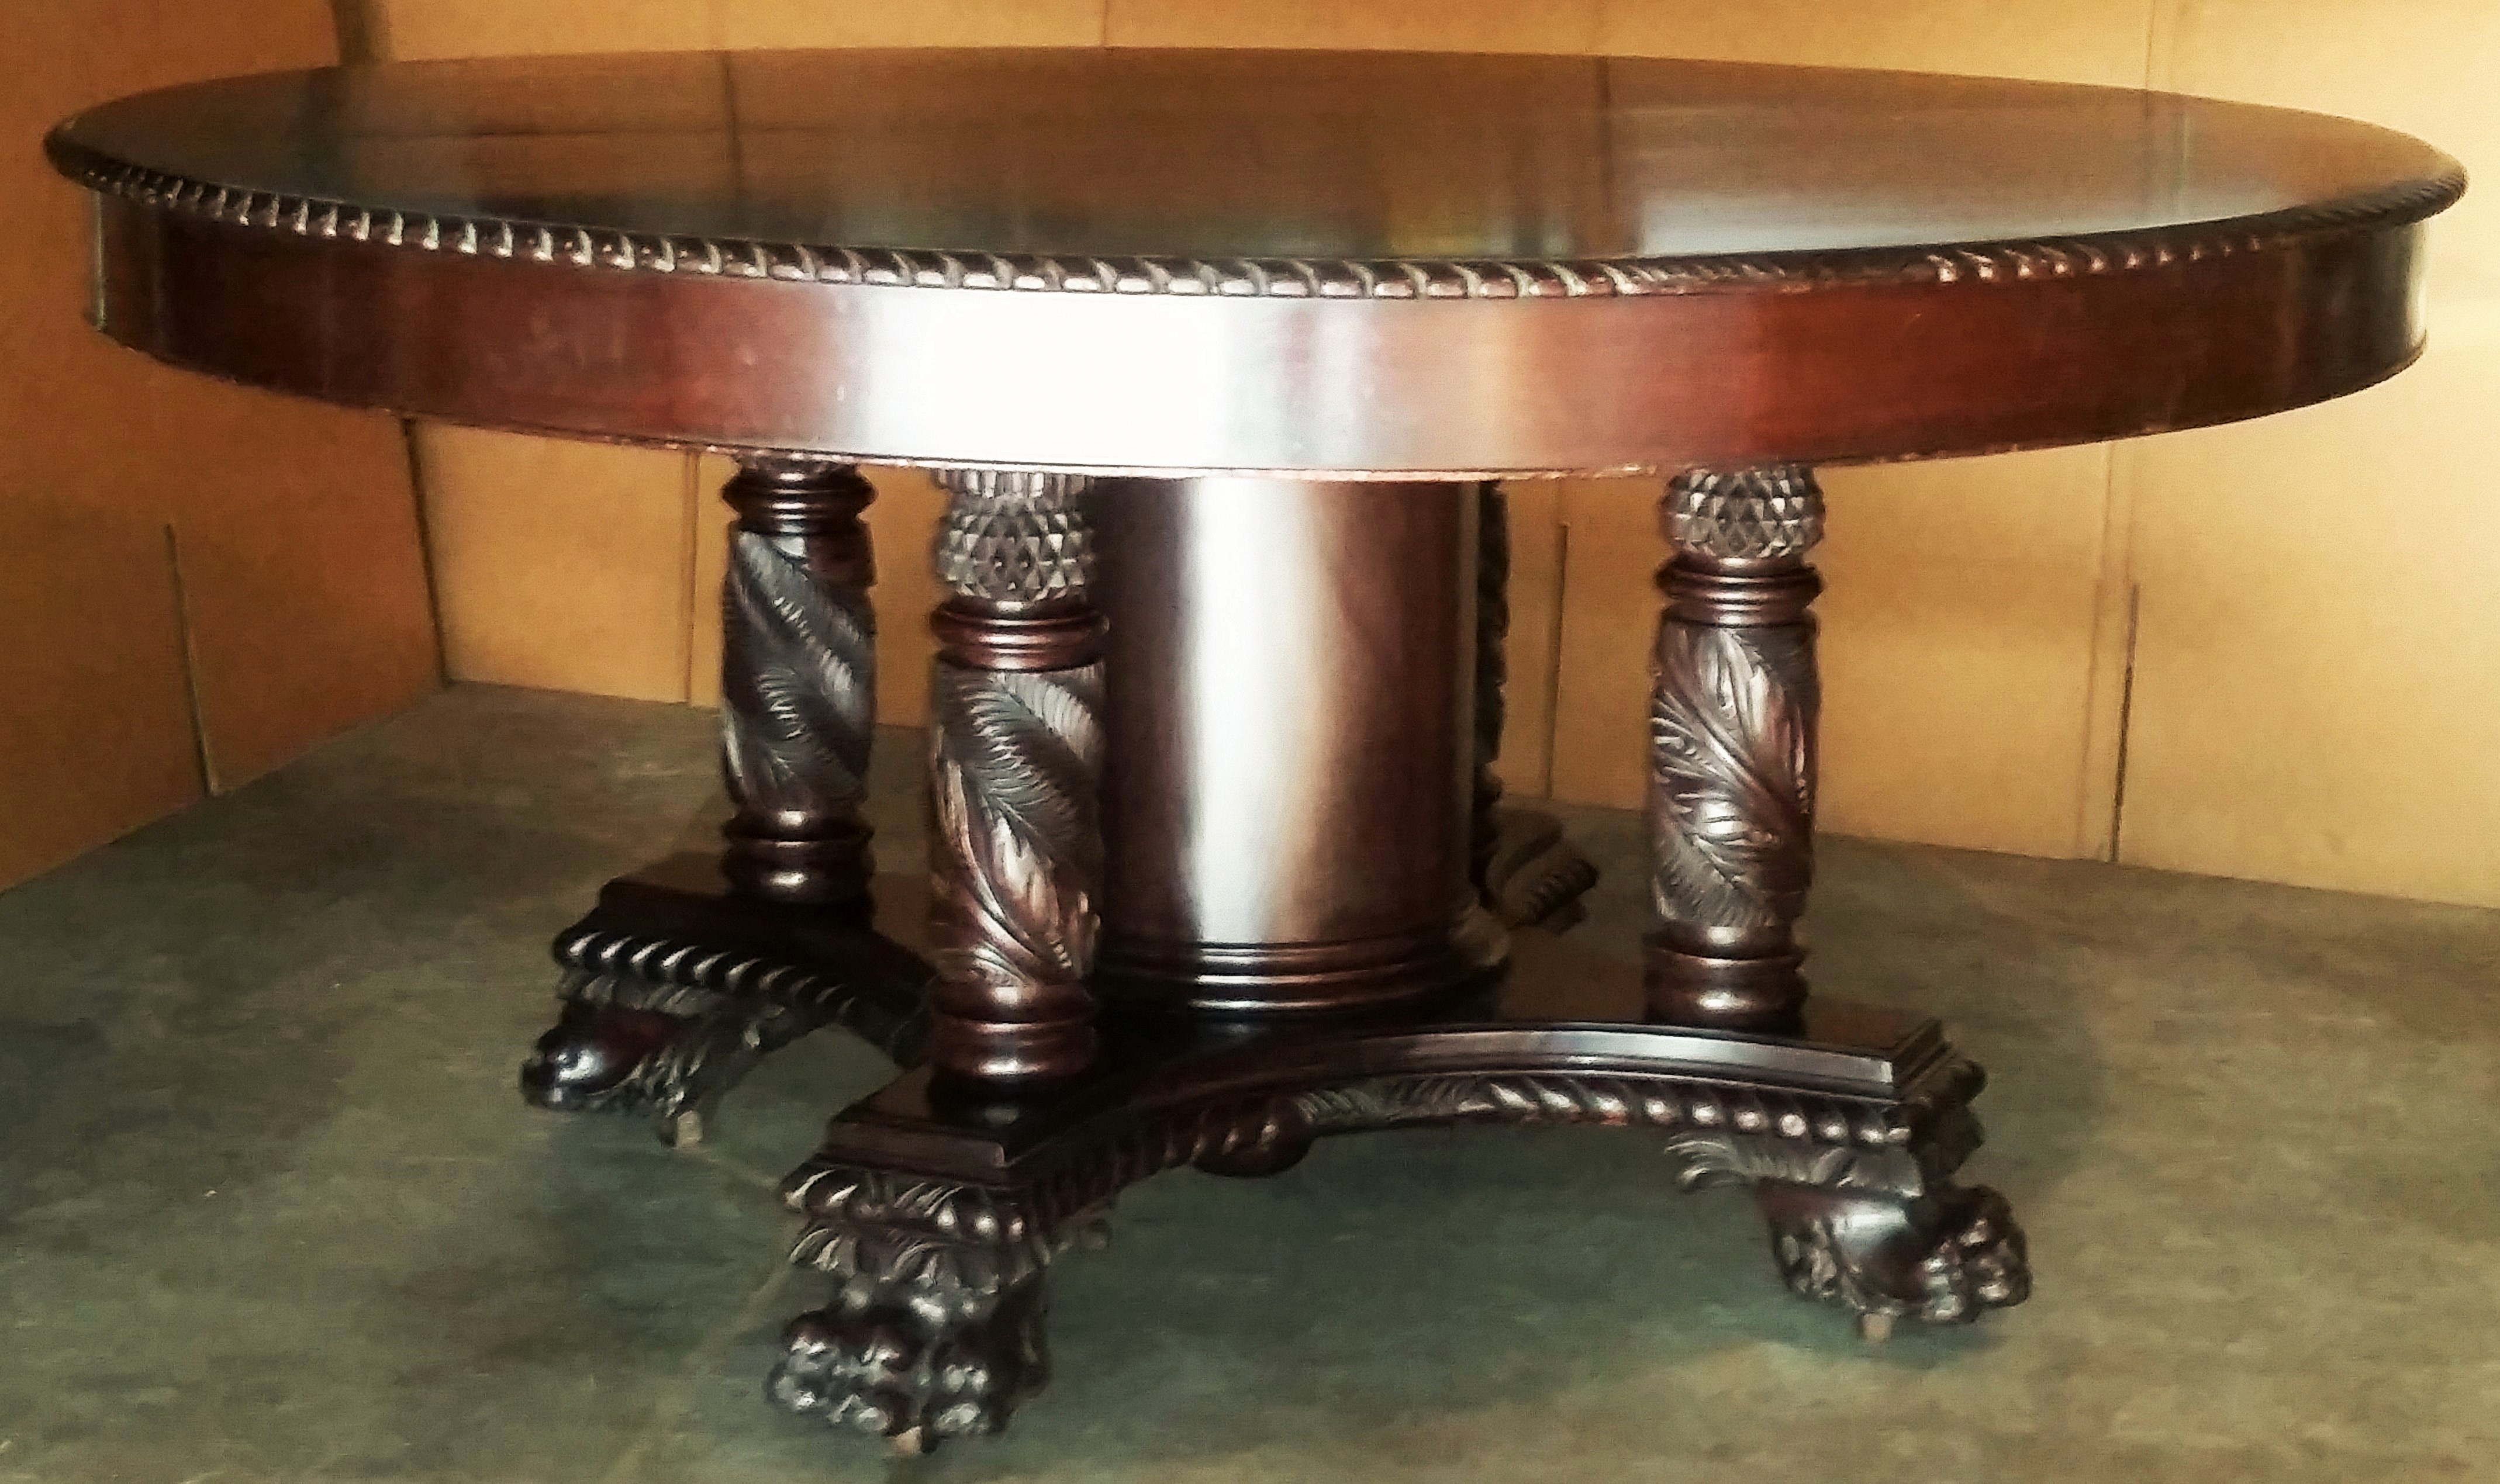 empire dining room table